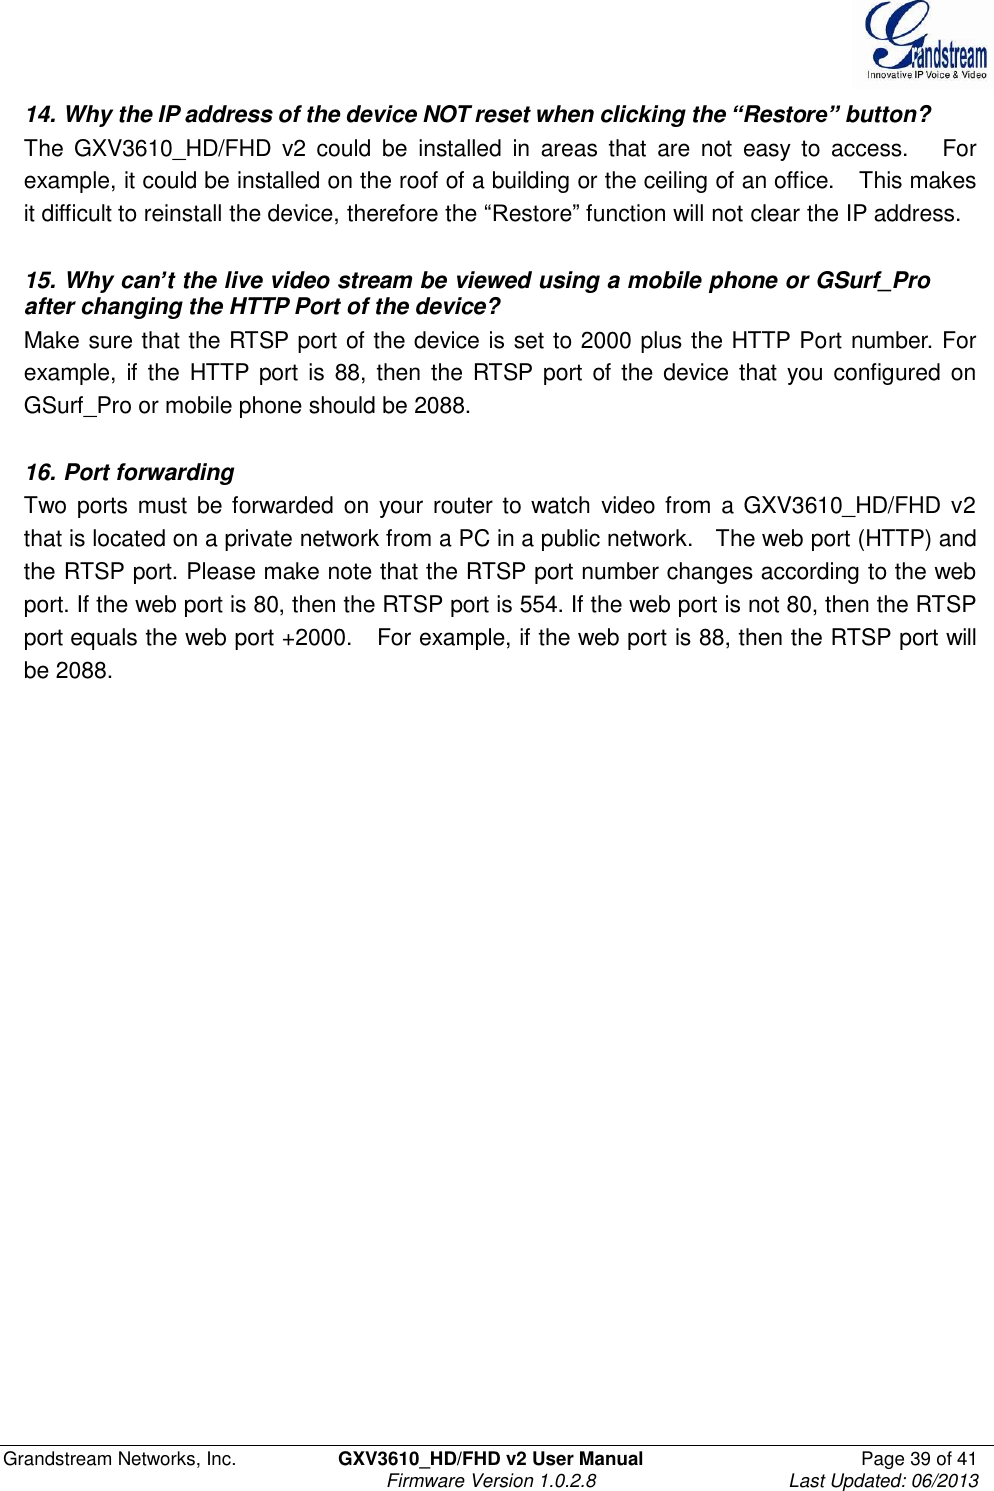  Grandstream Networks, Inc.  GXV3610_HD/FHD v2 User Manual  Page 39 of 41    Firmware Version 1.0.2.8  Last Updated: 06/2013  14. Why the IP address of the device NOT reset when clicking the “Restore” button? The  GXV3610_HD/FHD  v2  could  be  installed  in  areas  that  are  not  easy  to  access.      For example, it could be installed on the roof of a building or the ceiling of an office.    This makes it difficult to reinstall the device, therefore the “Restore” function will not clear the IP address.      15. Why can’t the live video stream be viewed using a mobile phone or GSurf_Pro  after changing the HTTP Port of the device? Make sure that the RTSP port of the device is set to 2000 plus the HTTP Port number. For example,  if  the HTTP  port  is 88,  then  the  RTSP  port  of  the device  that  you configured  on GSurf_Pro or mobile phone should be 2088.   16. Port forwarding Two ports must be forwarded on your  router to watch  video from a GXV3610_HD/FHD v2 that is located on a private network from a PC in a public network.   The web port (HTTP) and the RTSP port. Please make note that the RTSP port number changes according to the web port. If the web port is 80, then the RTSP port is 554. If the web port is not 80, then the RTSP port equals the web port +2000.    For example, if the web port is 88, then the RTSP port will be 2088.   